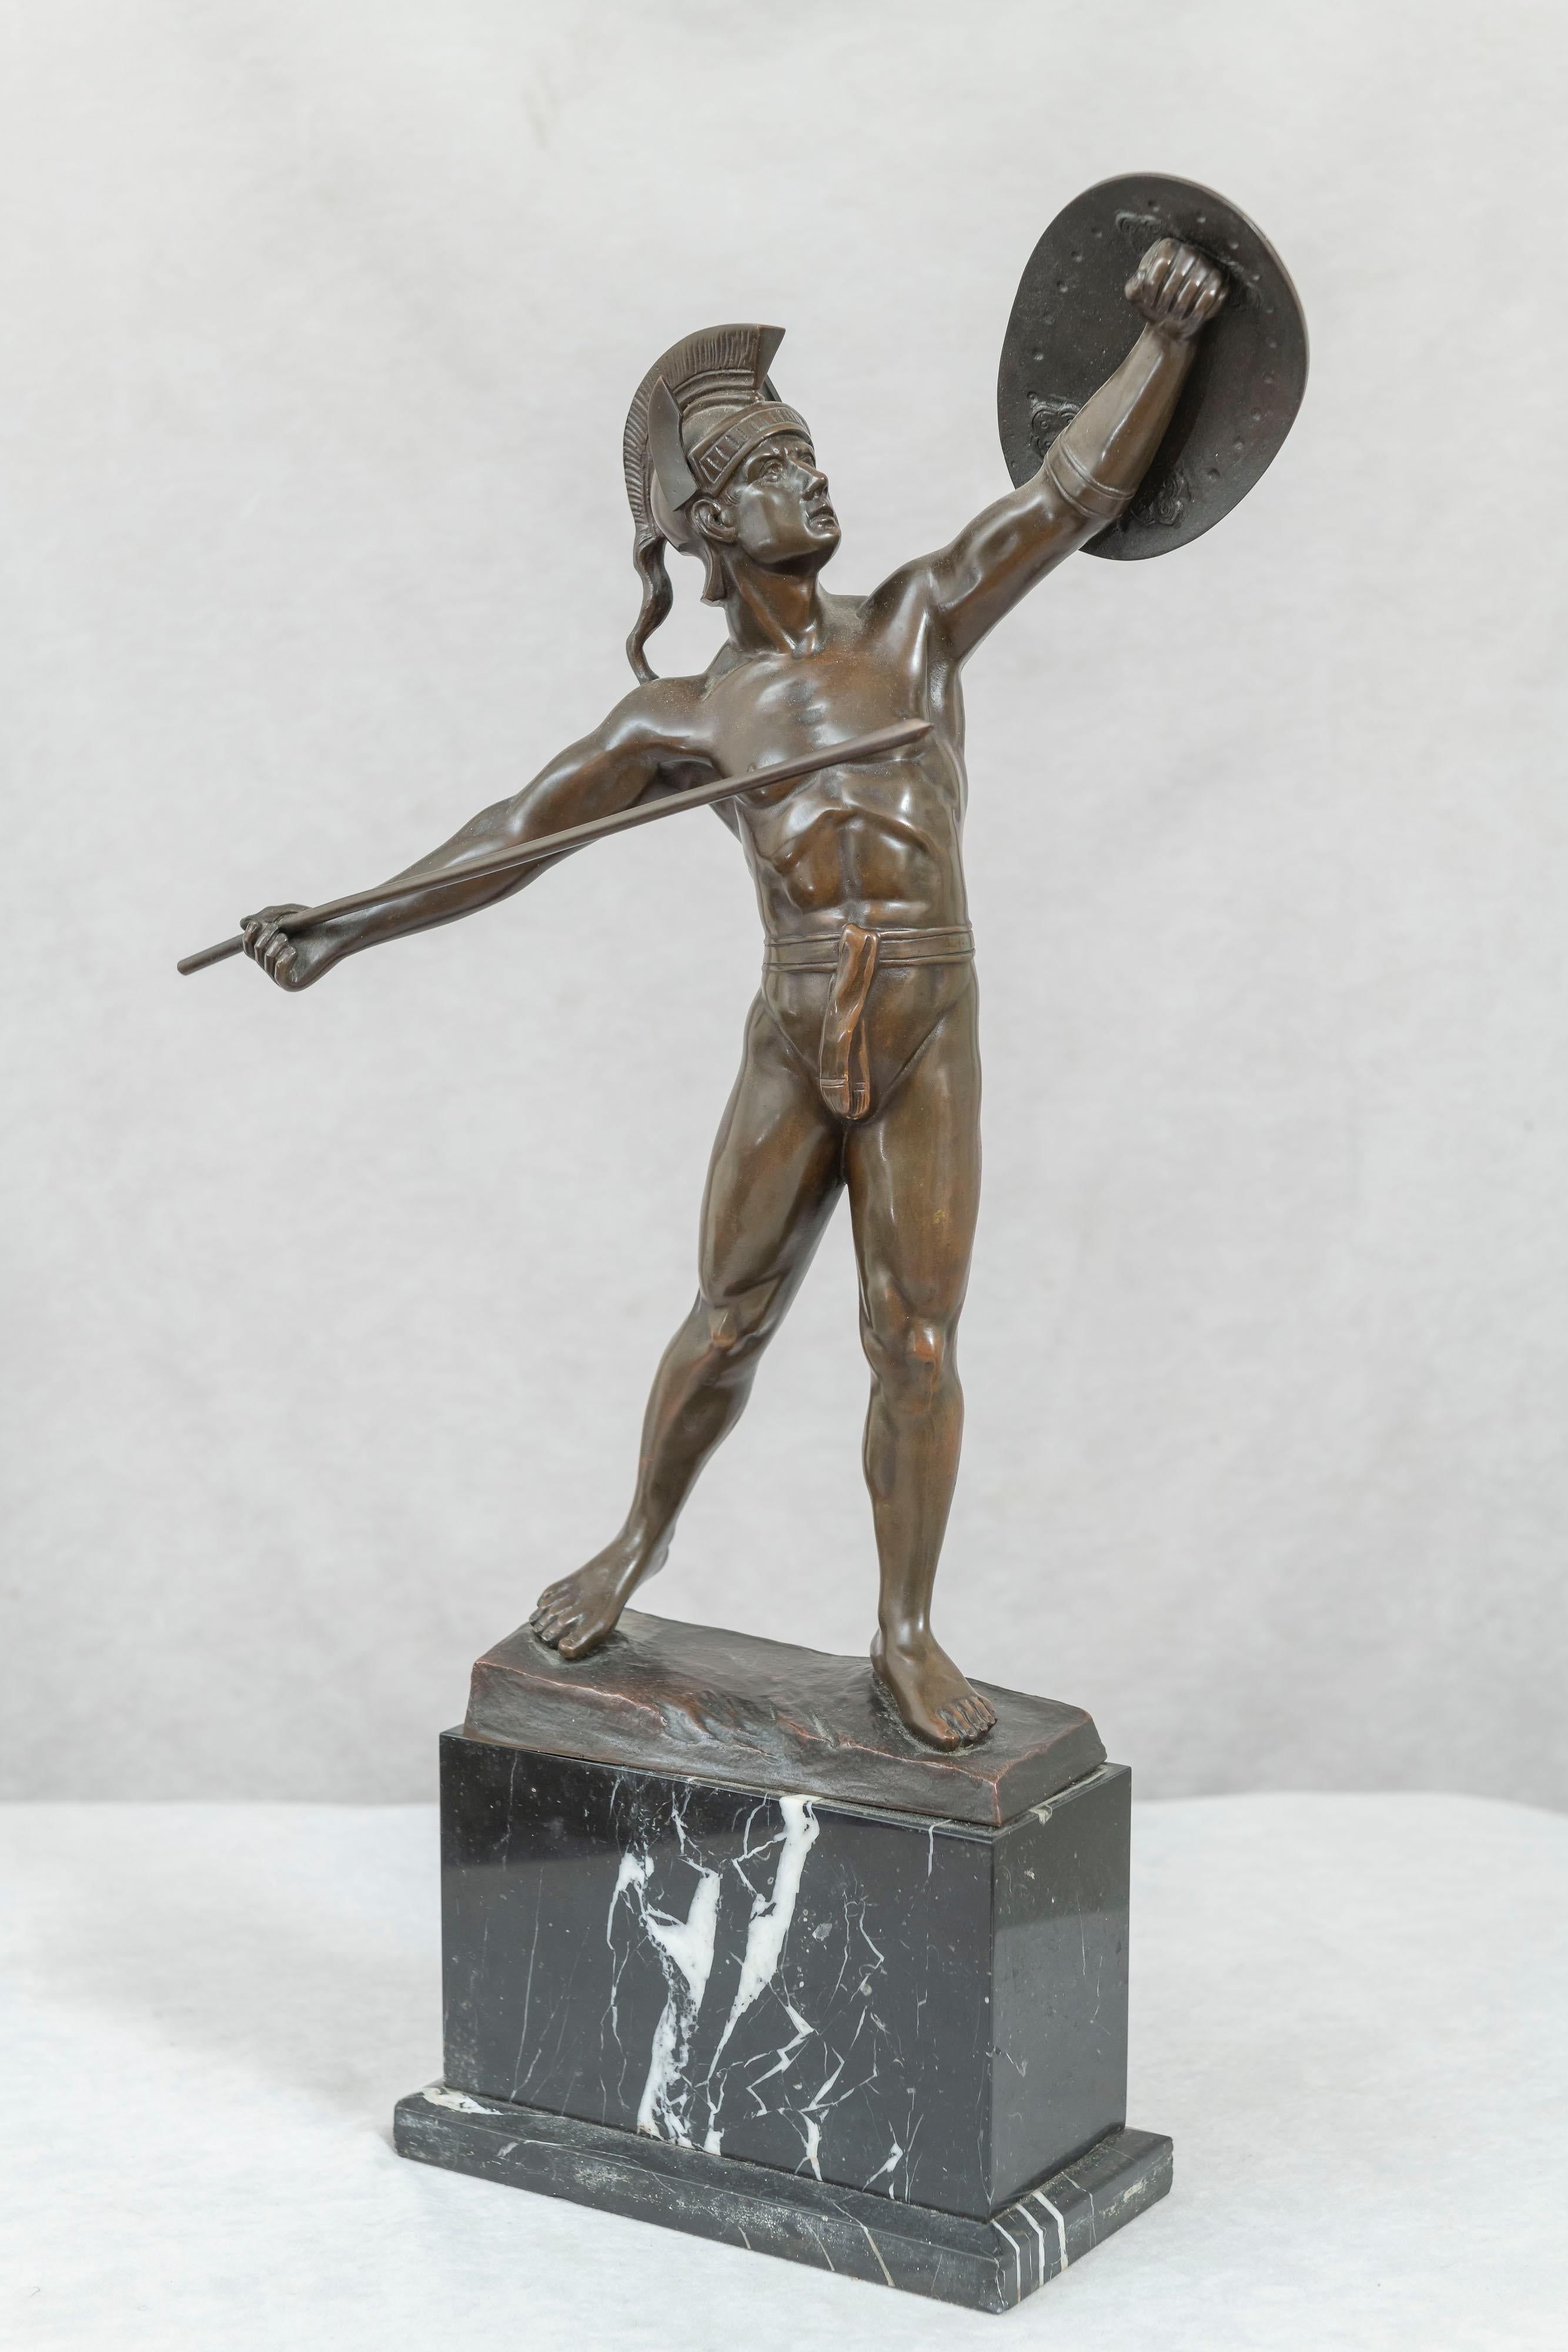 This handsome young man is in an appropriate pose as he goes into battle. Rich brown patina, fine detailed casting, and beautiful marble 2 tiered base. It is signed along the bottom edge of the bronze. A fine example of a very collectible genre of